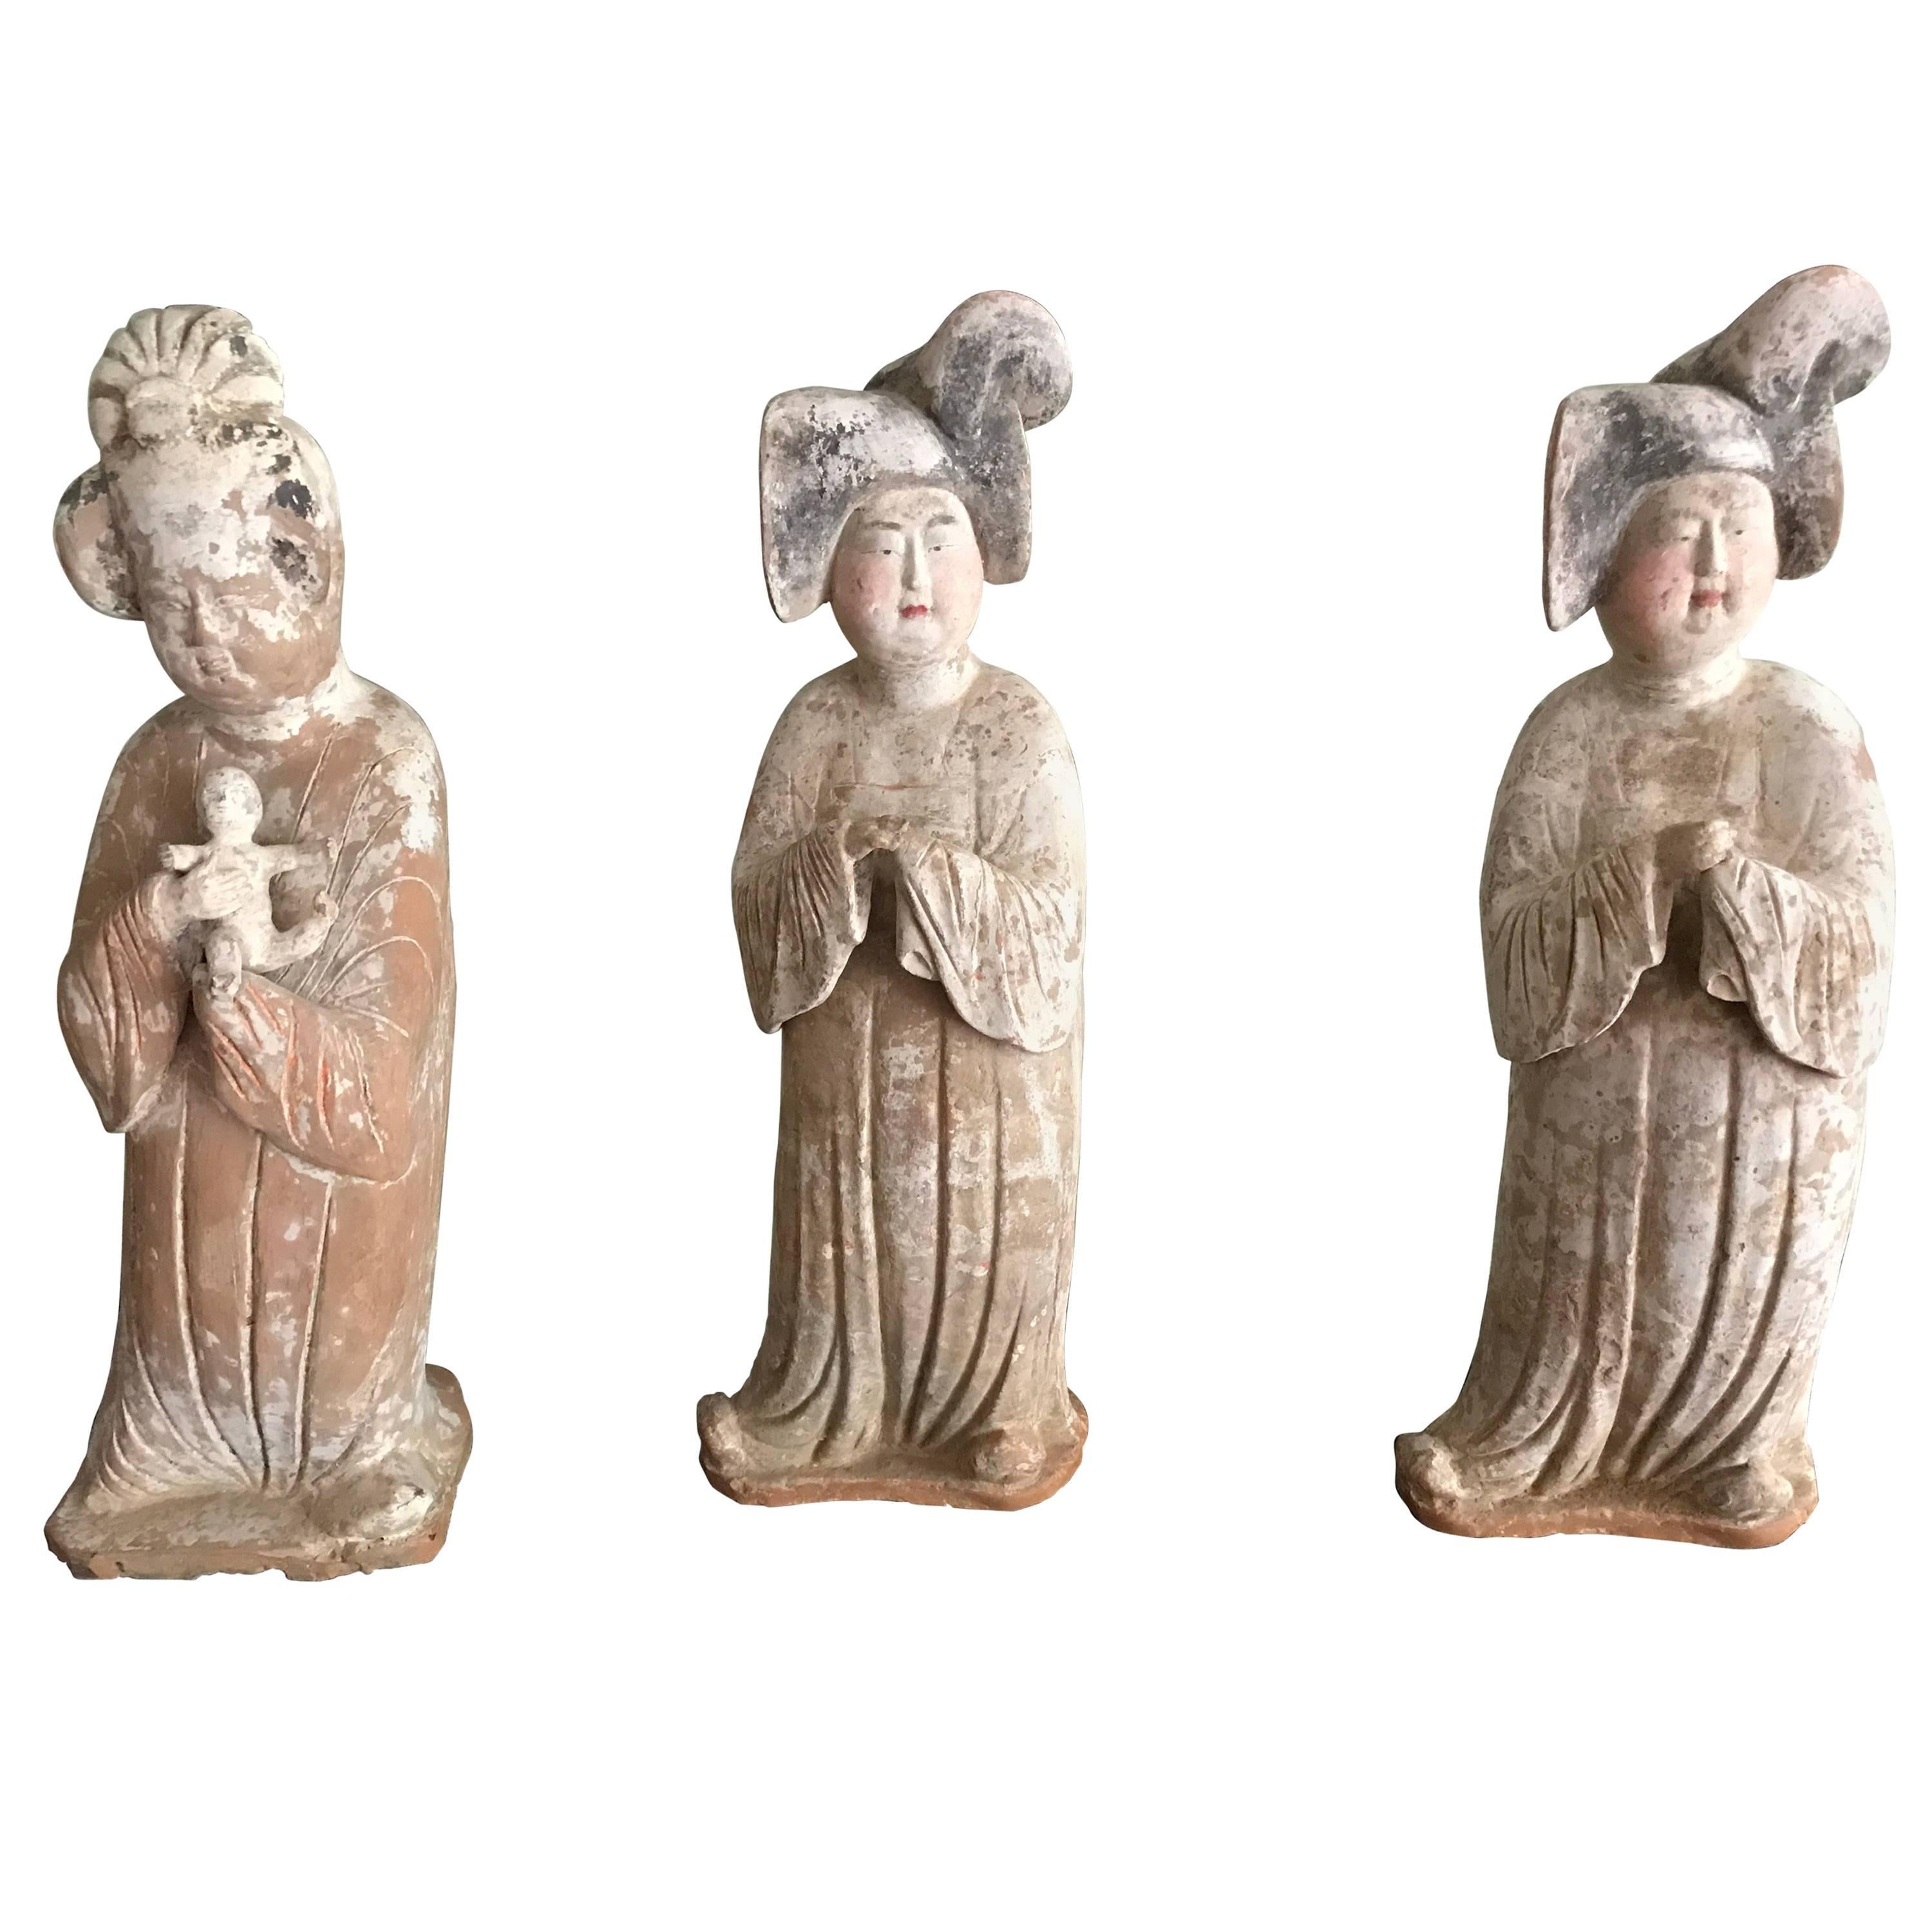 Three Tang Dynasty Fat Ladies 618-907ad Tl Test Authenticity Test
! For Sale